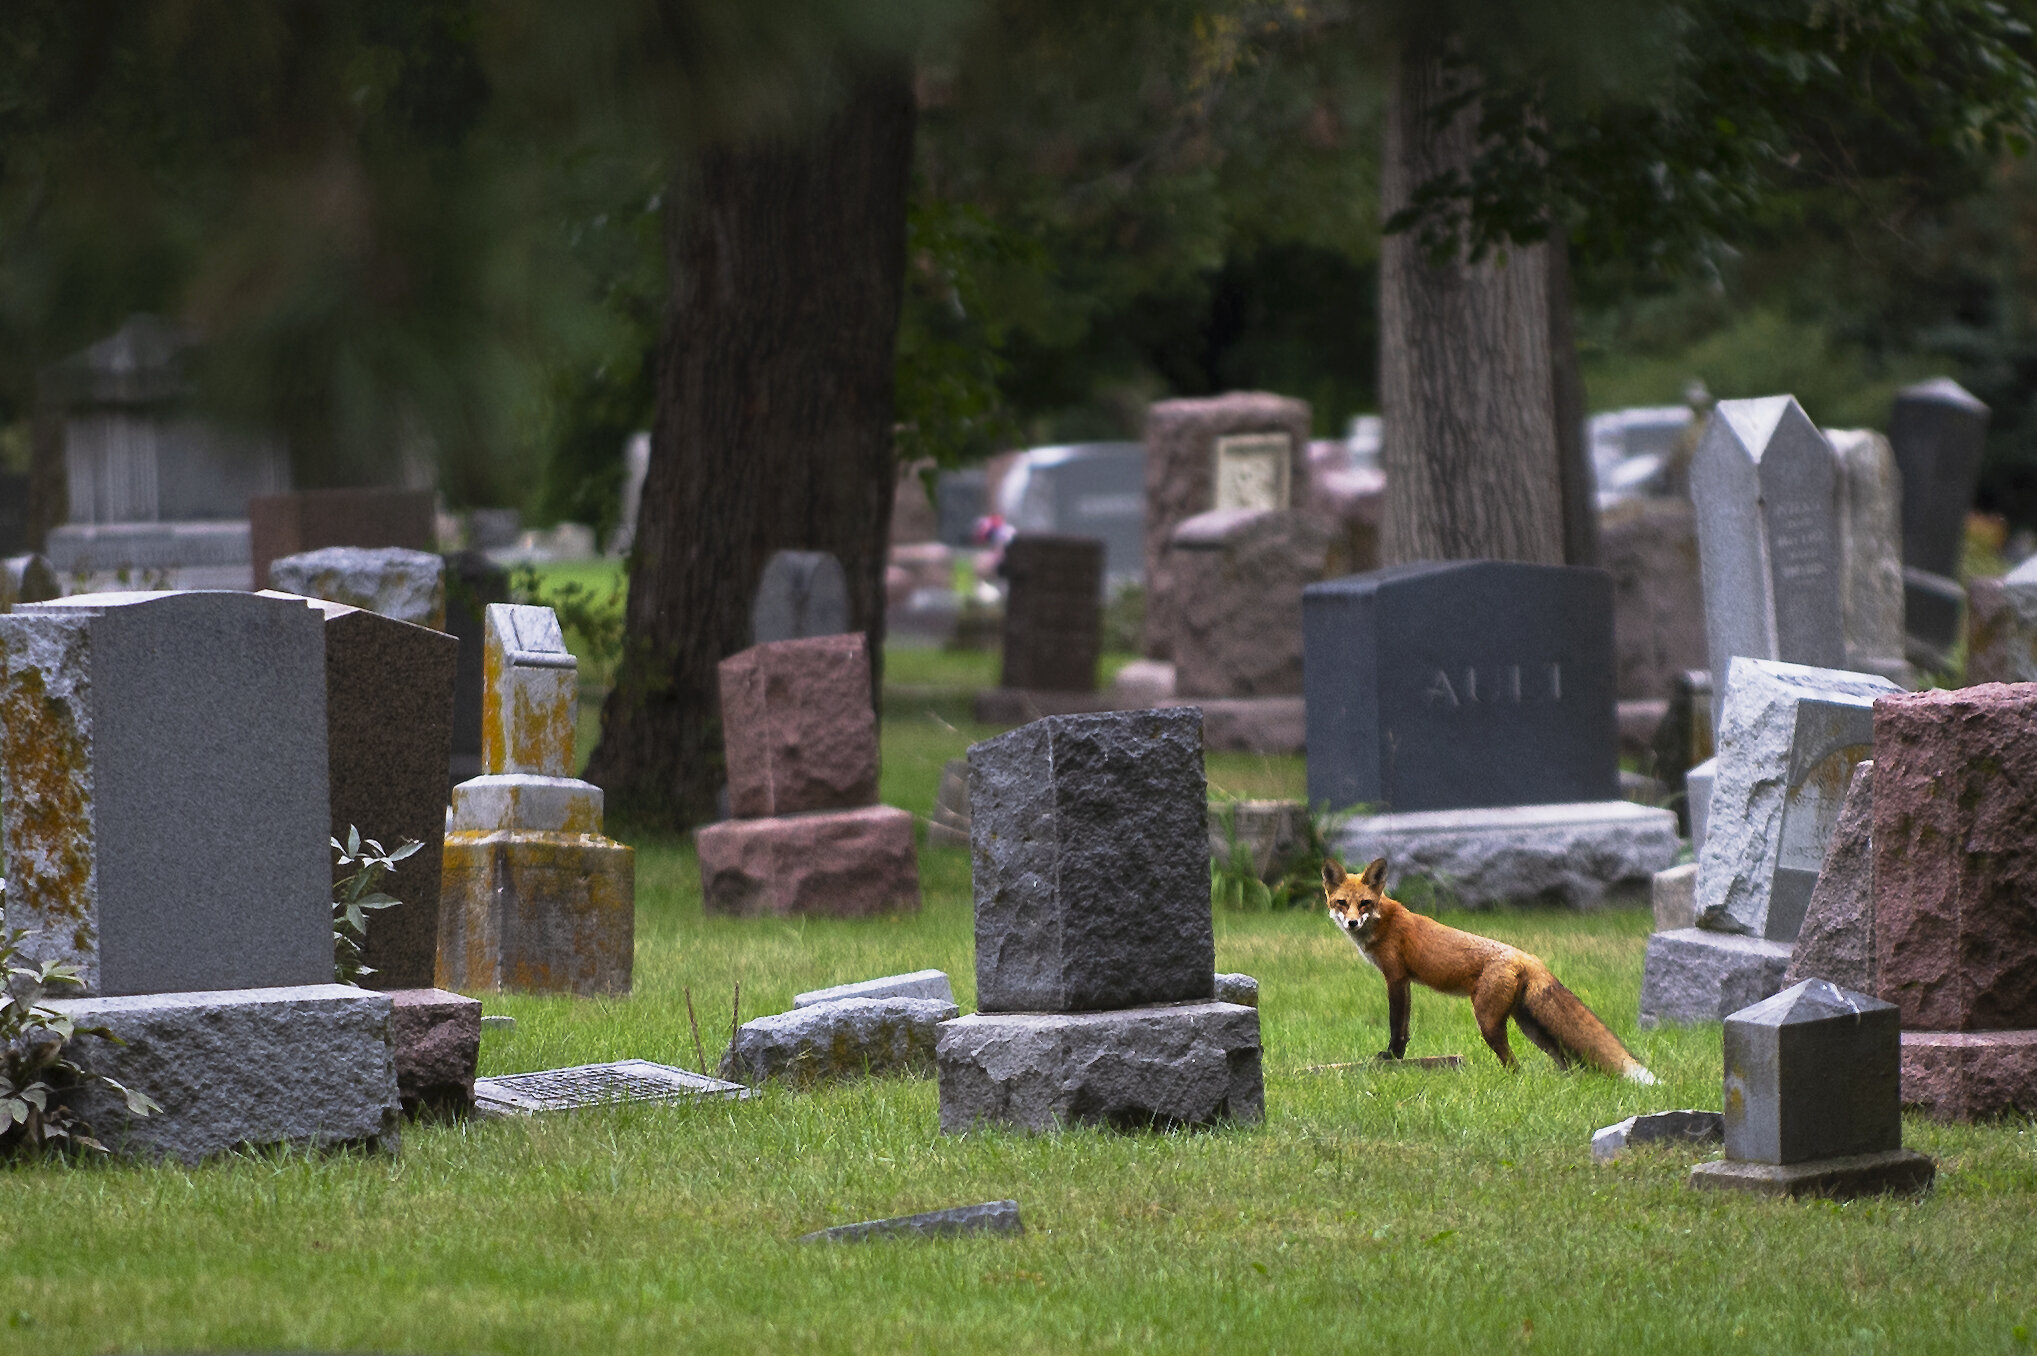  A Red Fox makes its way between headstones at Wyuka Cemetery on Sunday, September 27, 2020, in Lincoln, Nebraska. Sunday greeted Lincoln residents with cloudy skies and a high of around 78 degrees and a low of 62 degrees. KENNETH FERRIERA, Journal S